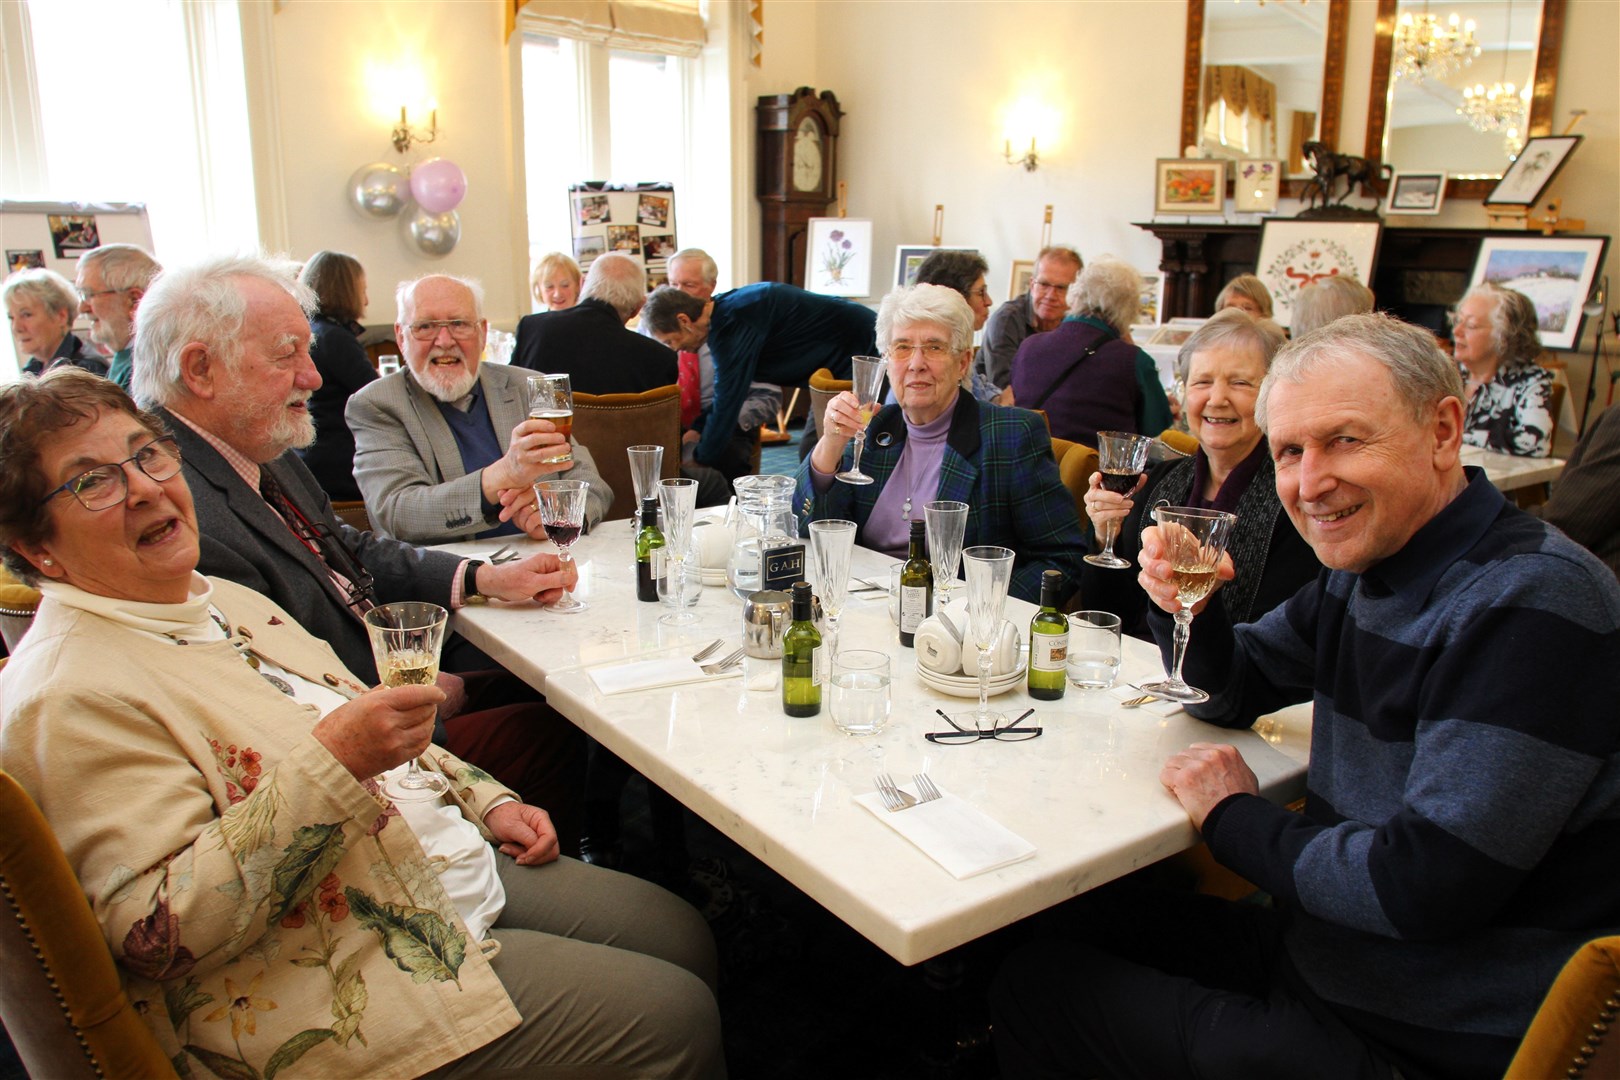 Cheeers to Grantown u3a! Sue Sykes, Ian Sykes, Bill Steele, Joan Steele, Elspeth Sage and Graham Sage enjoy the get-together.